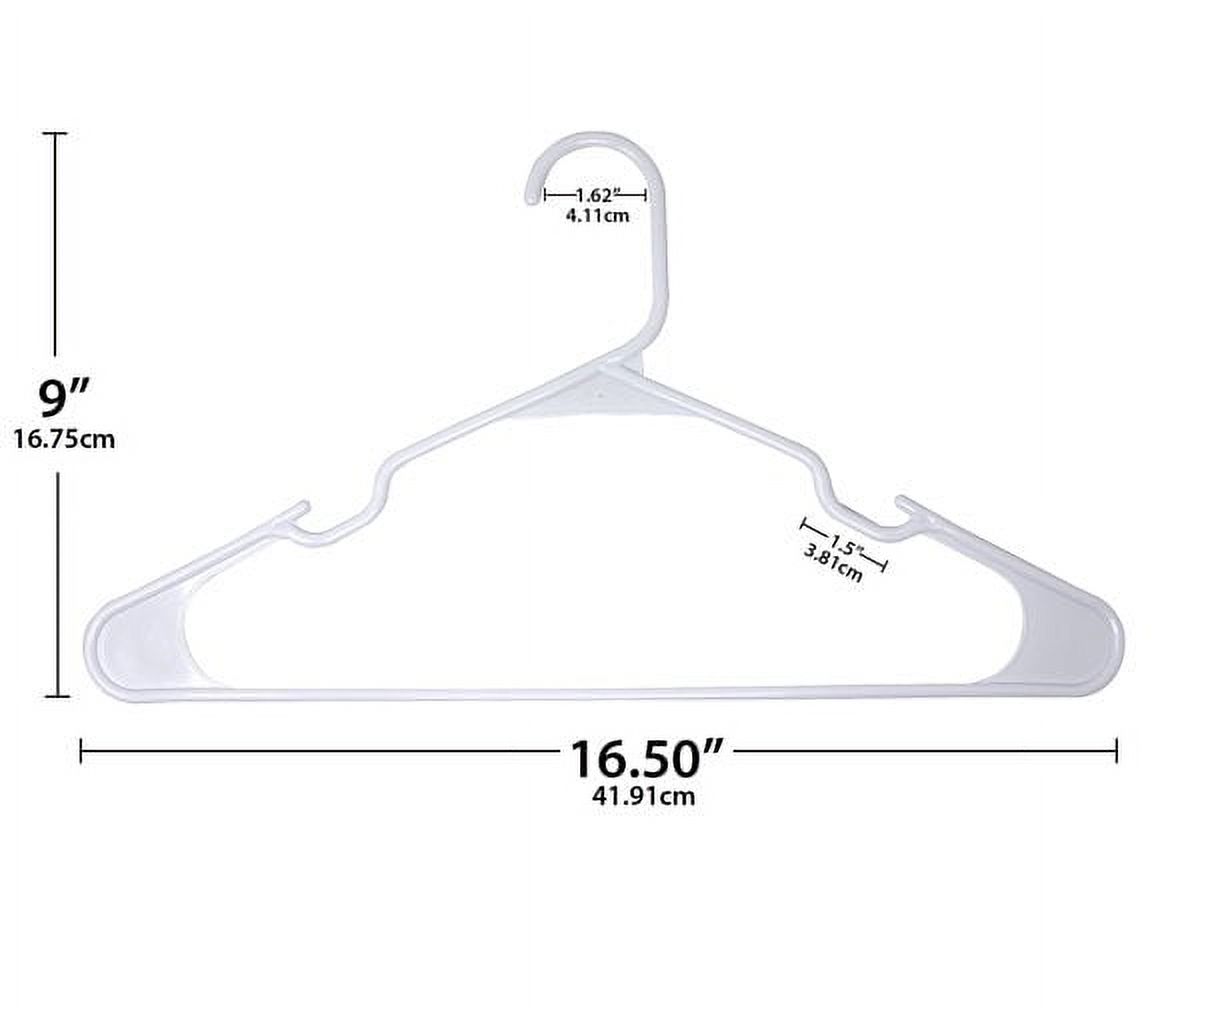 Mainstays Adult & Teen Clothing Hangers, 50 Pack, White, Durable Plastic - image 2 of 5